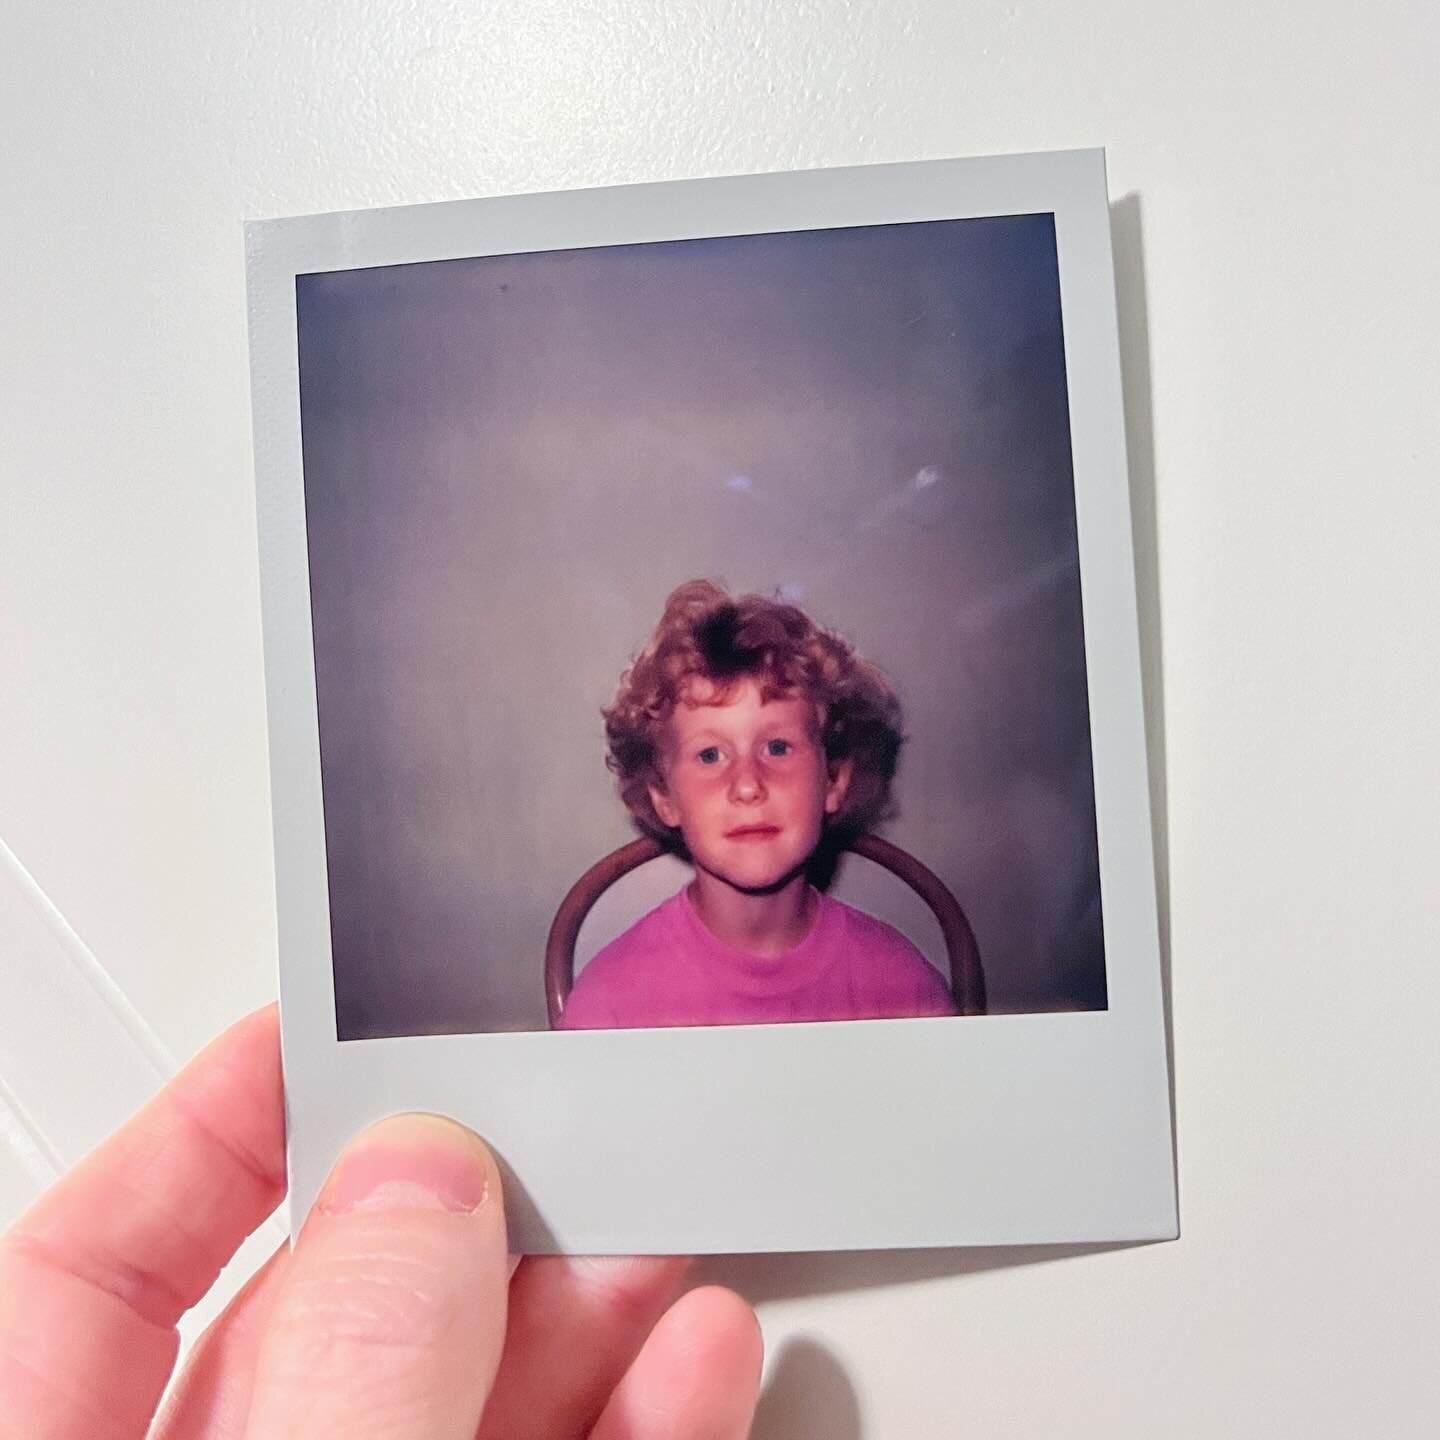 4 year old Felicia, 1991. My mom gave this photo back to me the other day. It was part of &lsquo;Operation Family Identification&rsquo;. This photo, my details and fingerprints were all recorded so &ldquo;my family had my complete identification reco